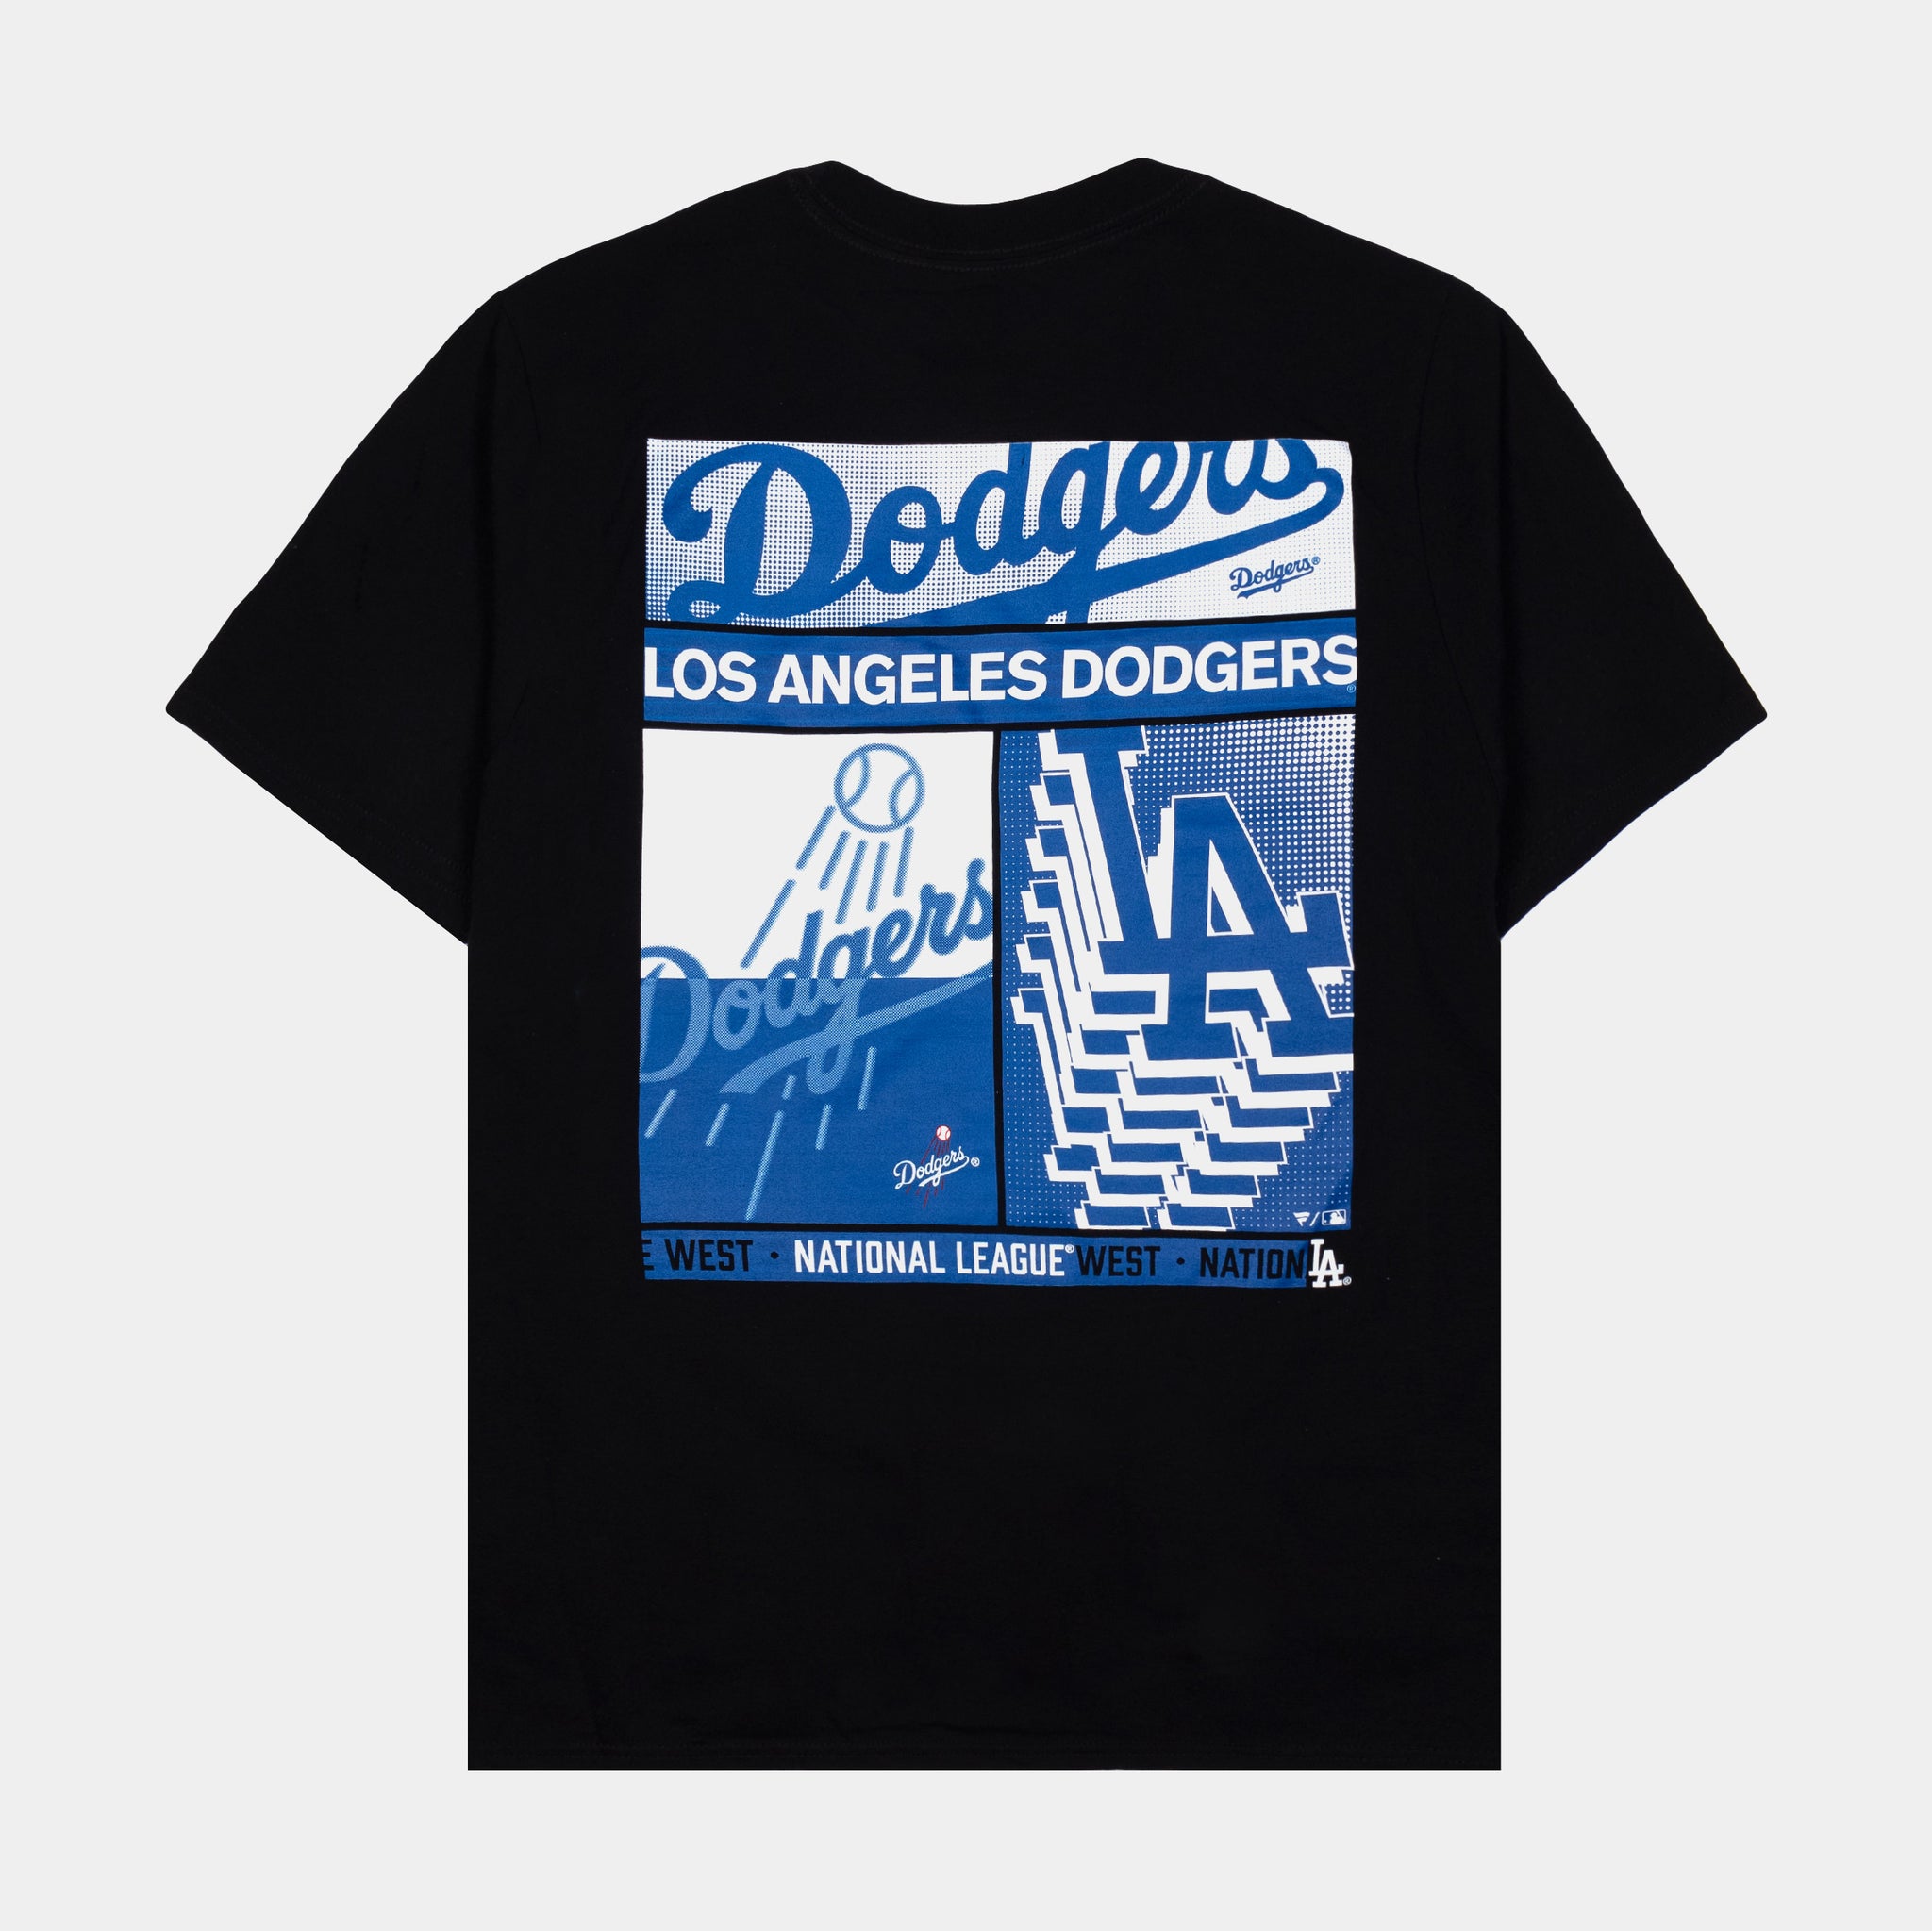 Fanatics Los Angeles Dodgers Men's Grey Fathers Day T-Shirt 21 Gry / M